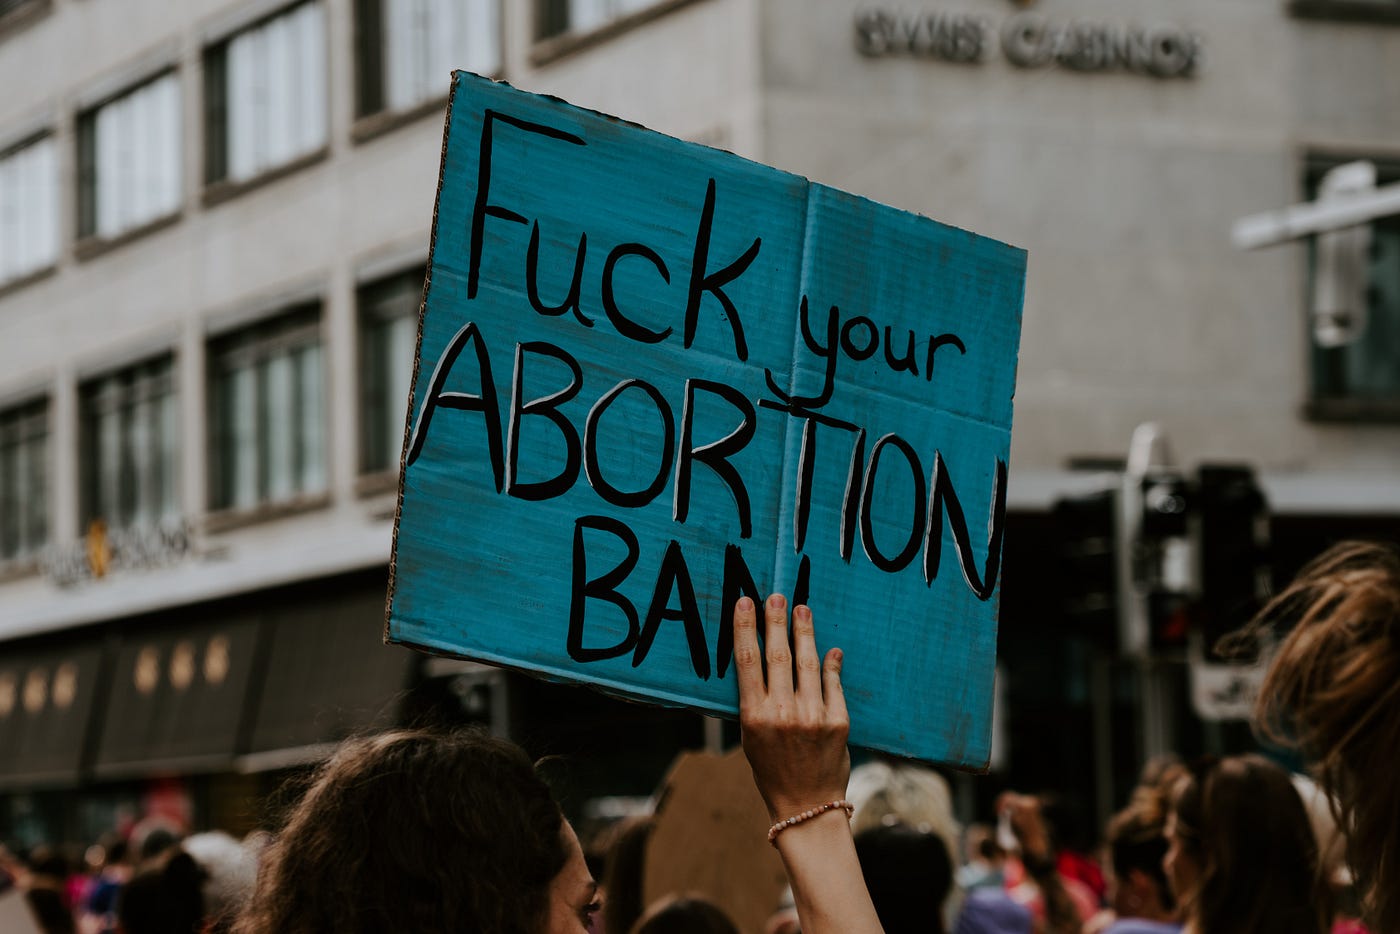 Fuck your abortion ban